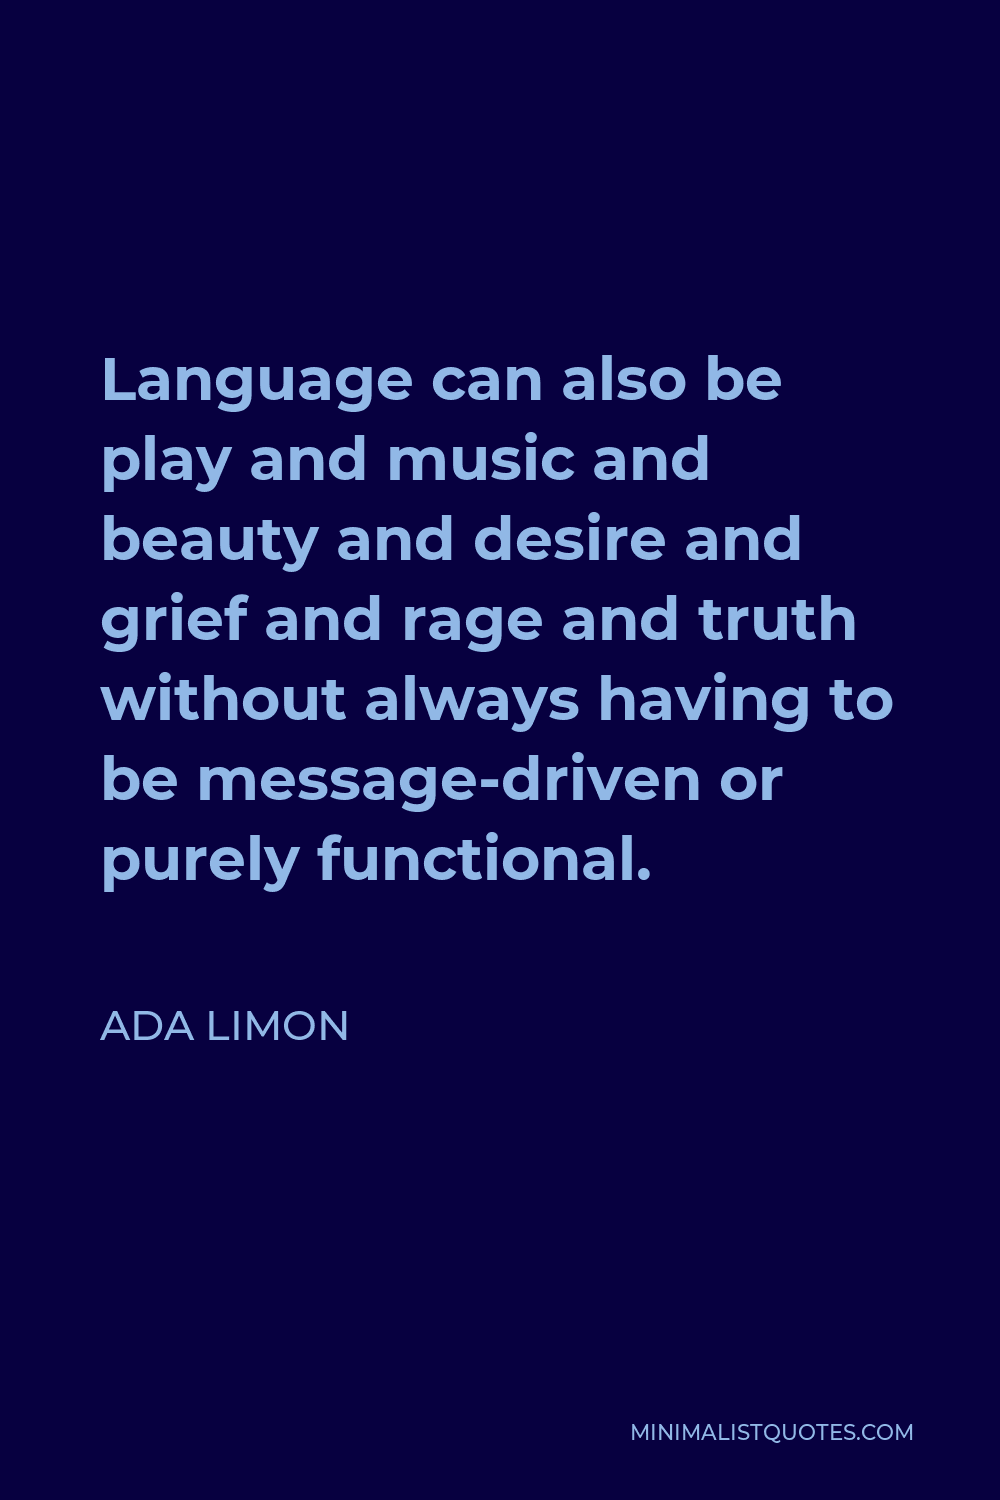 Ada Limon Quote - Language can also be play and music and beauty and desire and grief and rage and truth without always having to be message-driven or purely functional.